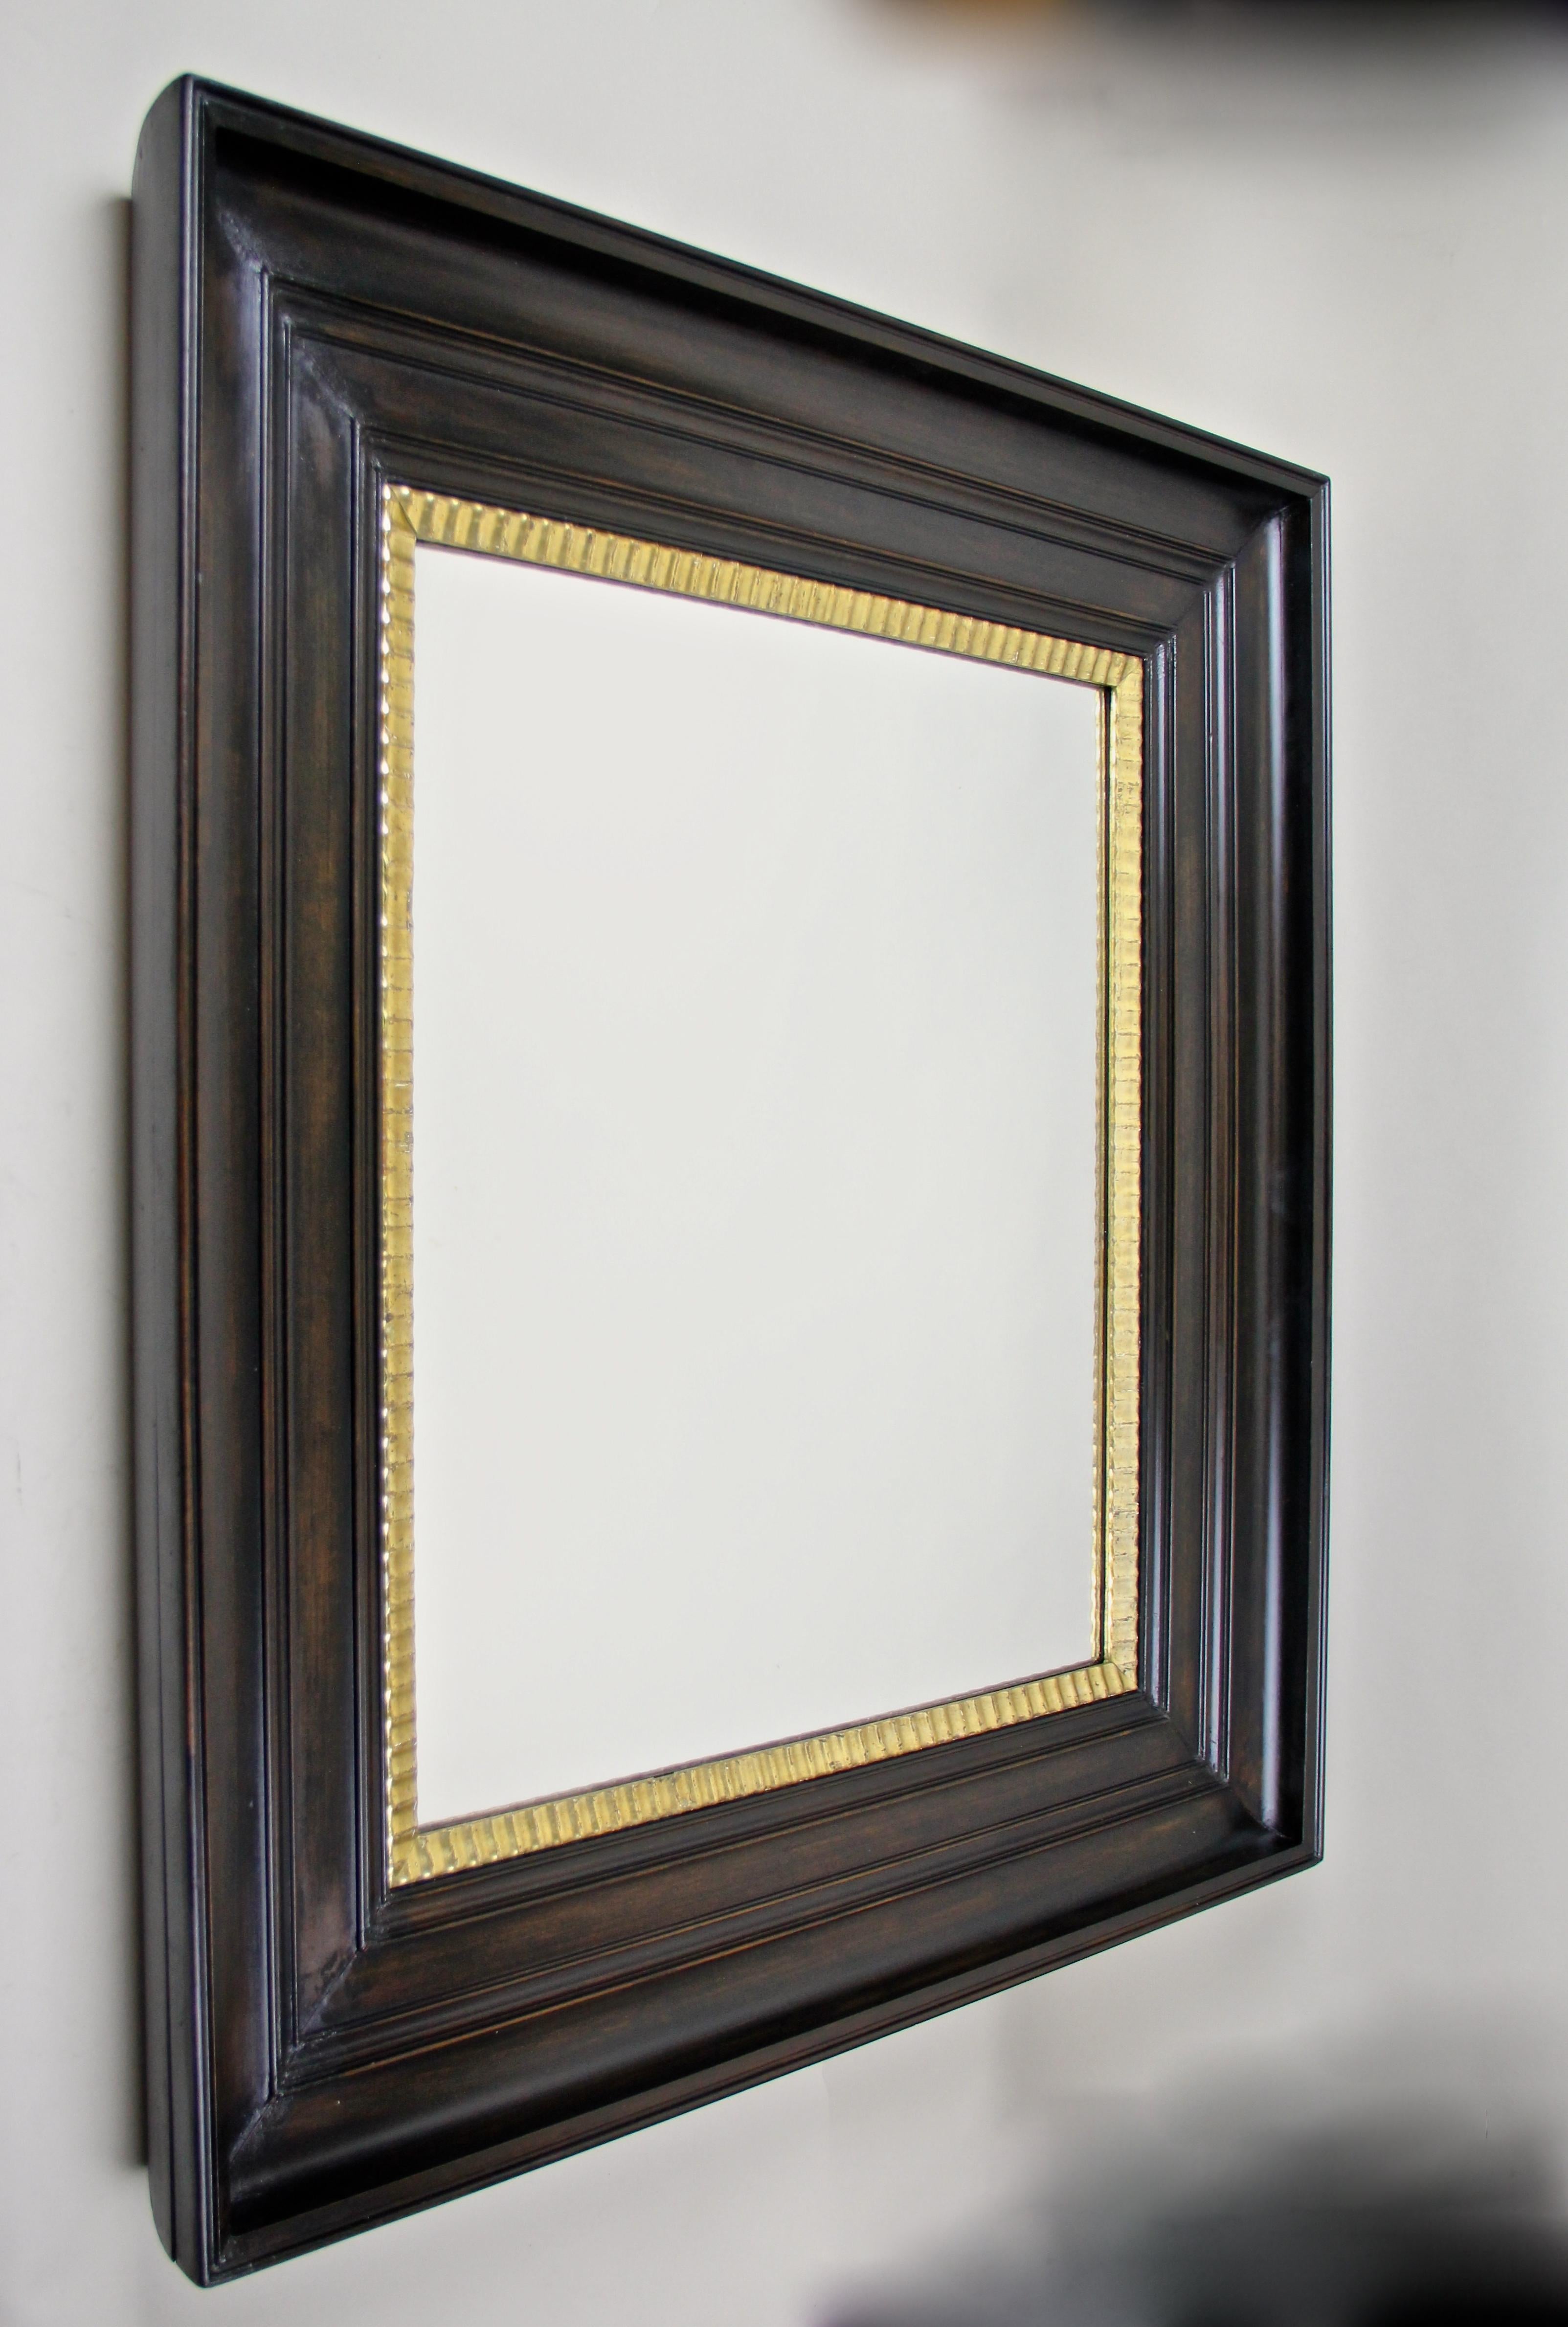 Timeless massive cherrywood wall mirror from the late 19th century circa 1890 in Austria. This beautiful large wall mirror impresses with its wide dark brown almost black stained, cambered cherrywood frame. So-called 